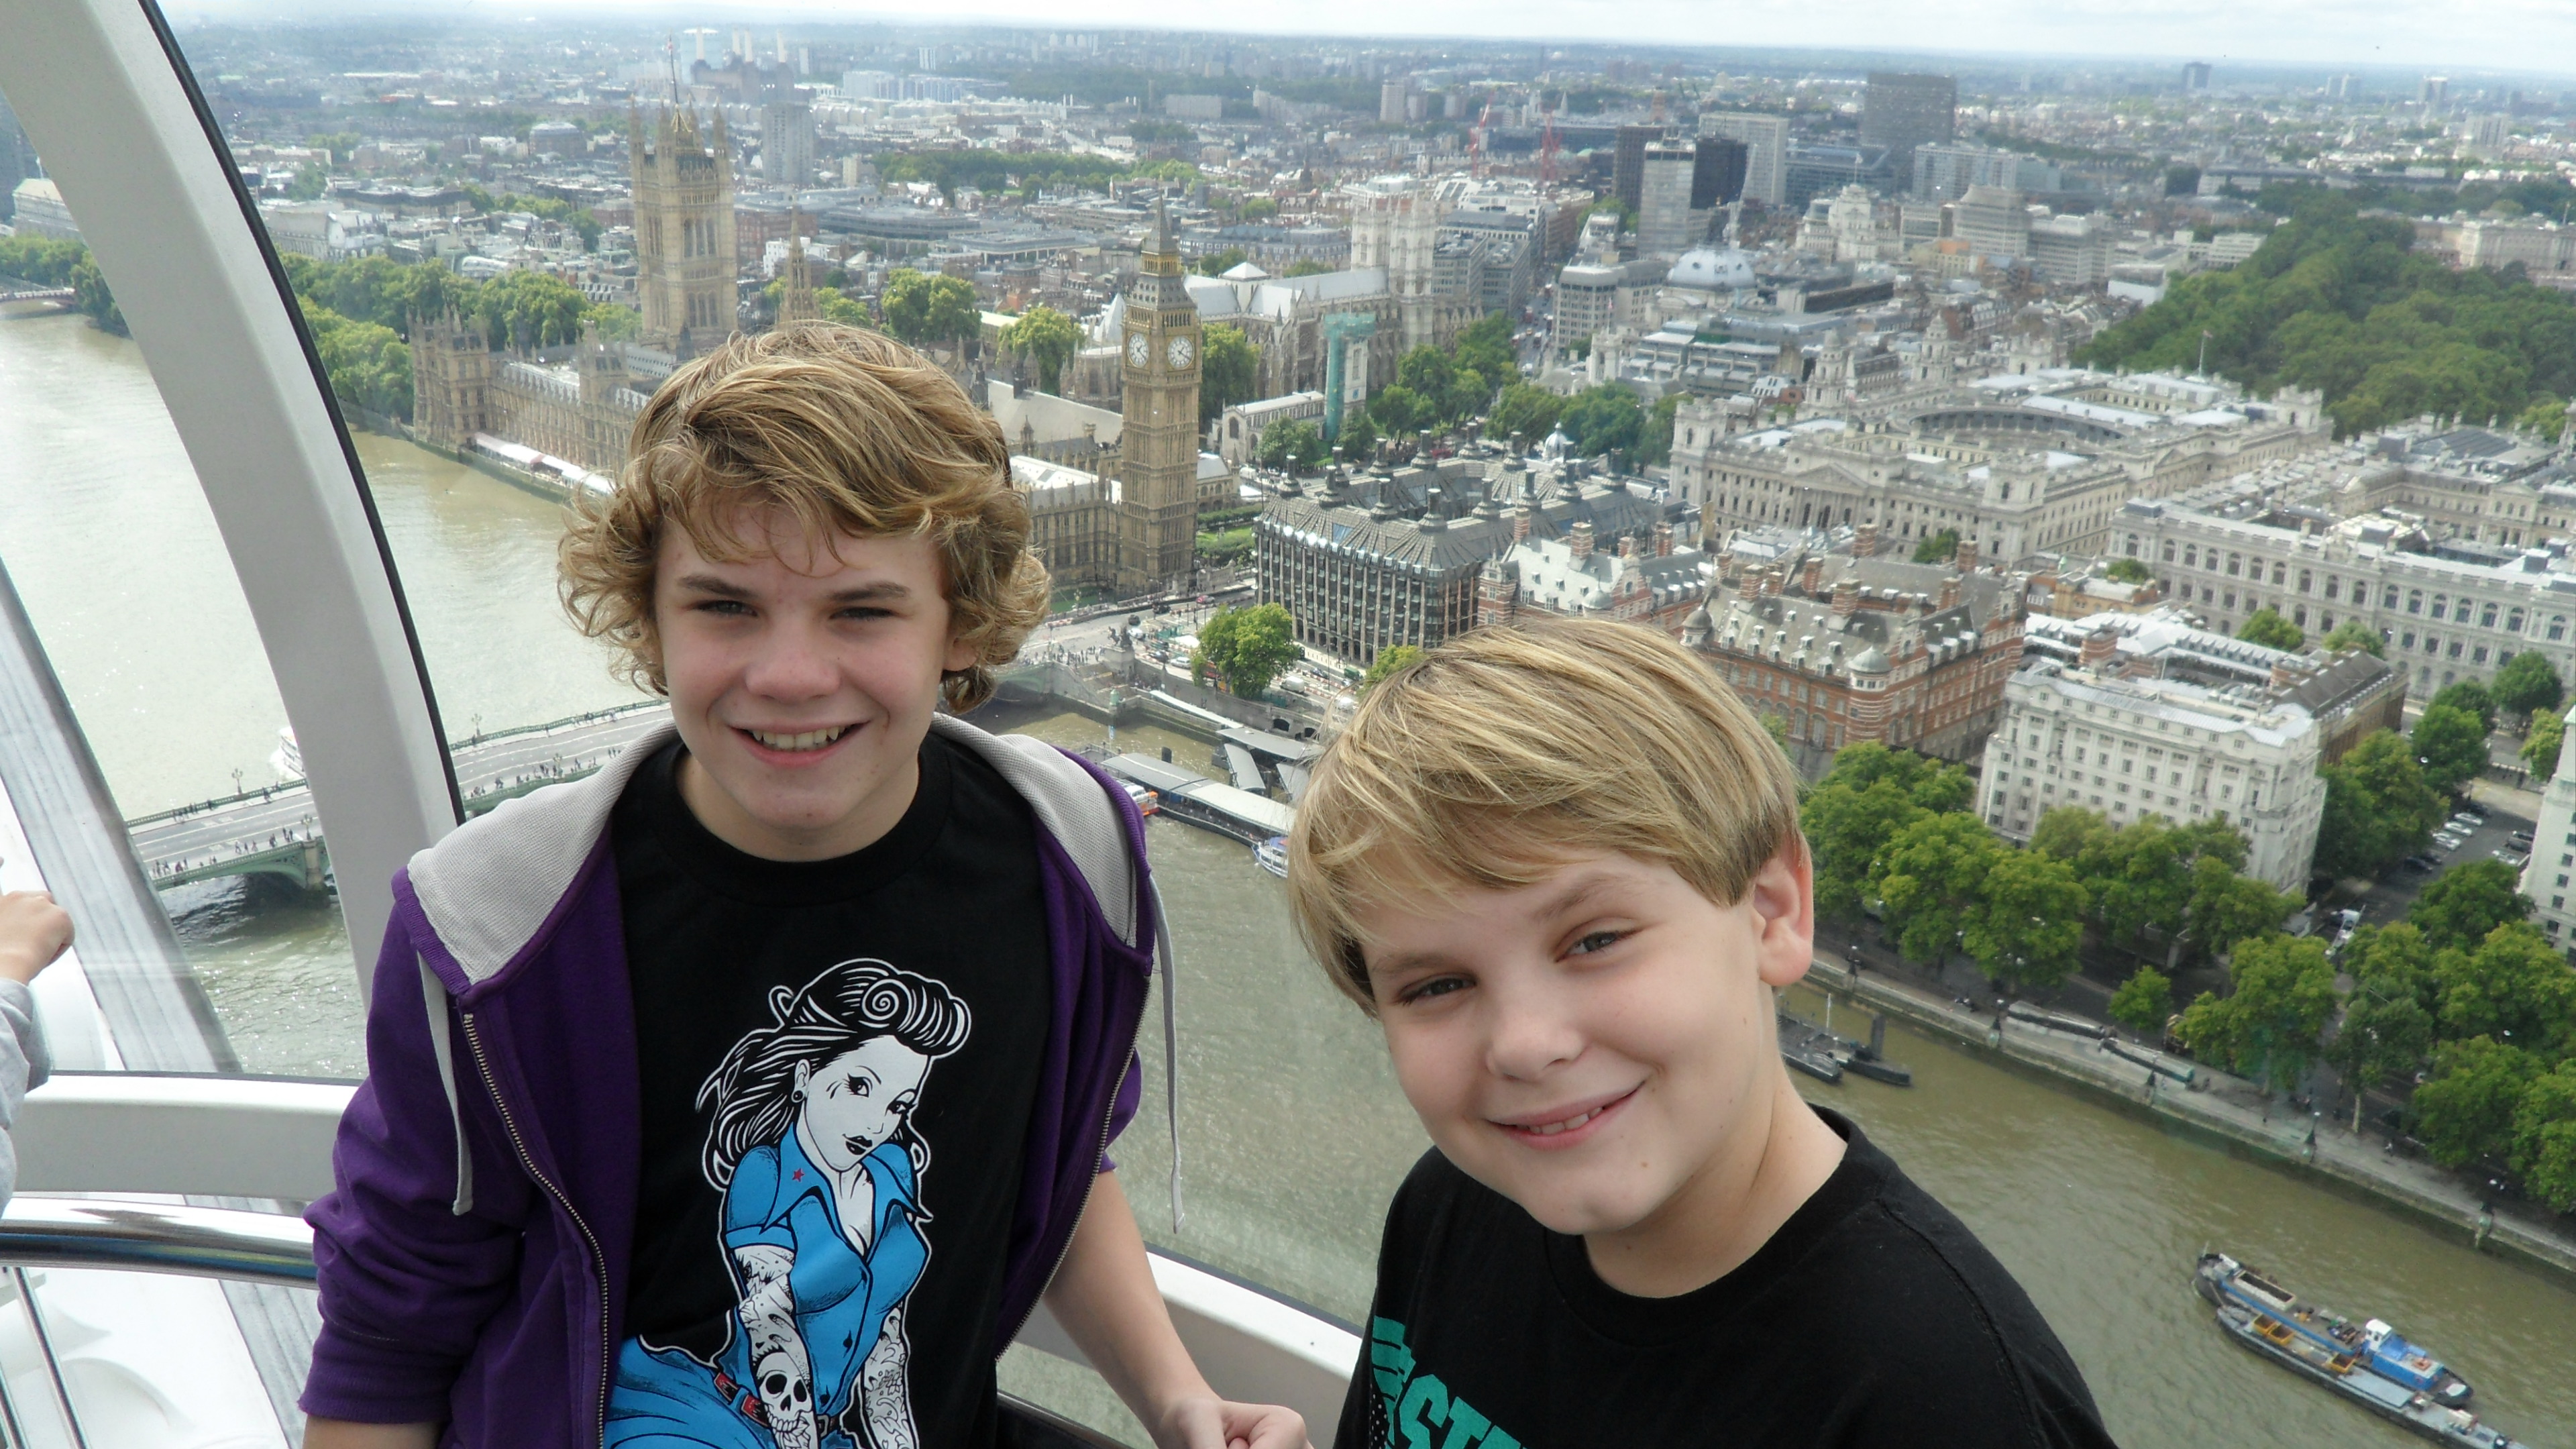 Ryan Hartwig and Reese Hartwig on the Eye of London with Big Ben in the background while on a break from shooting 